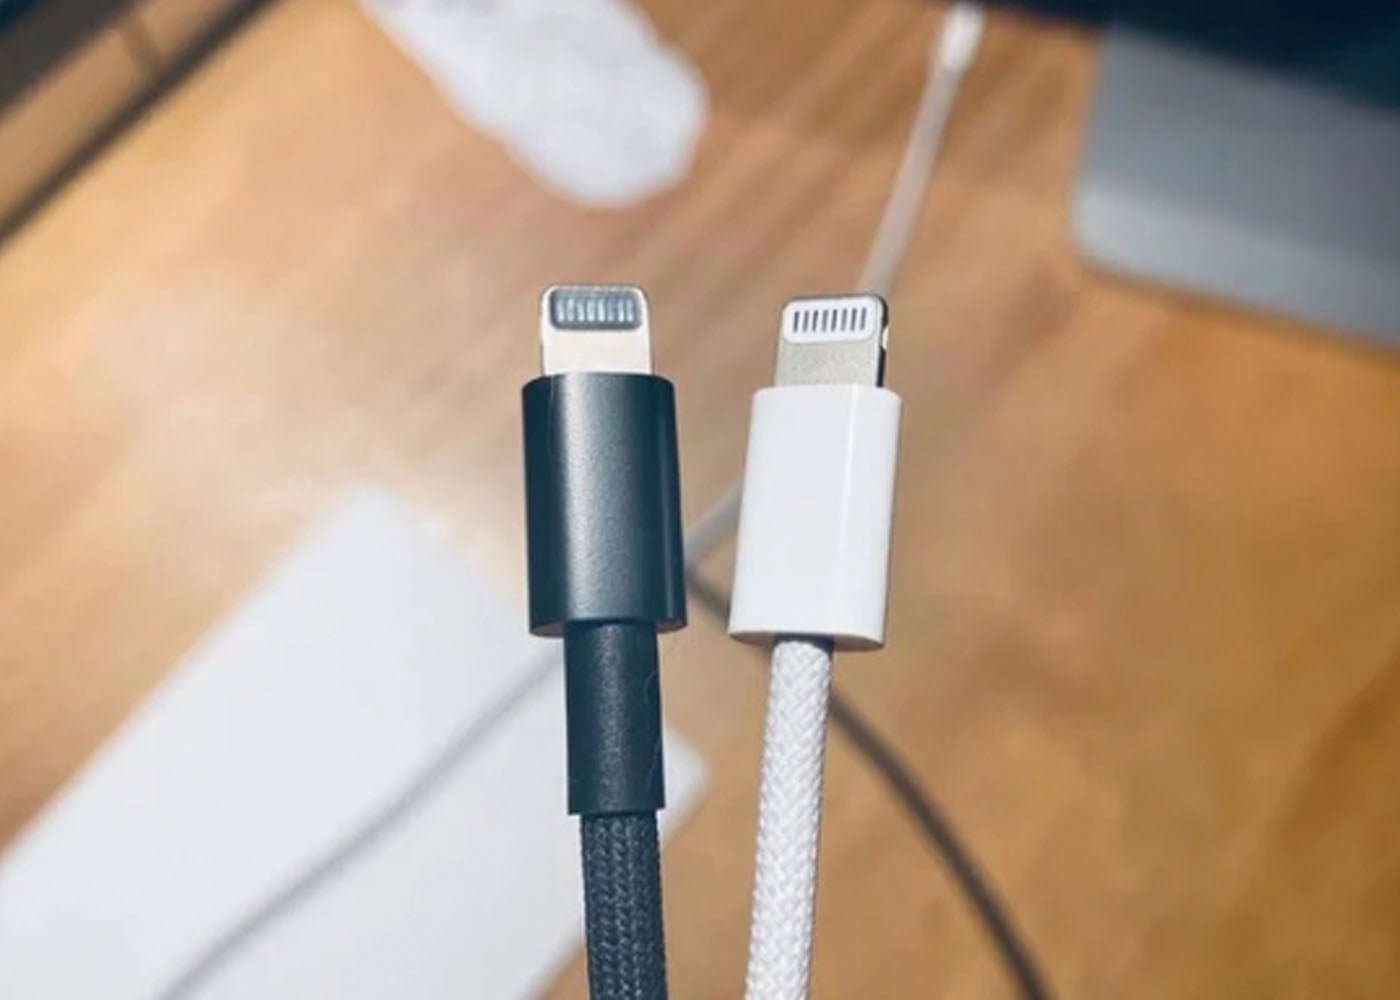 IPhone cable